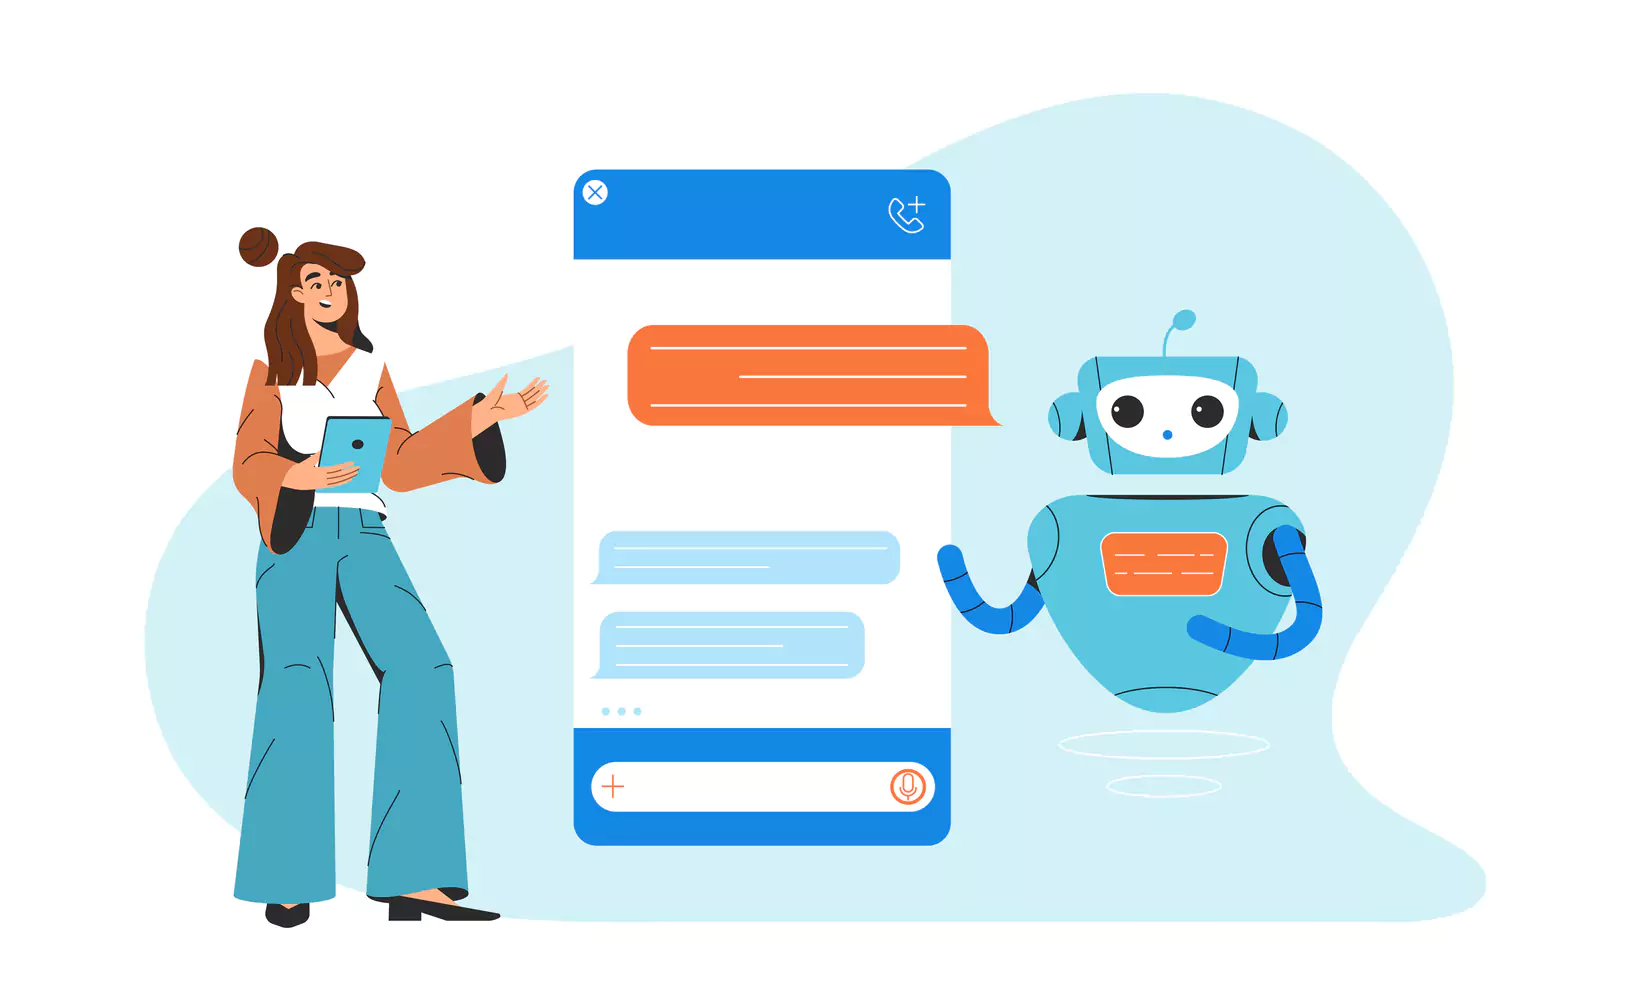 What are Contextual Chatbots?